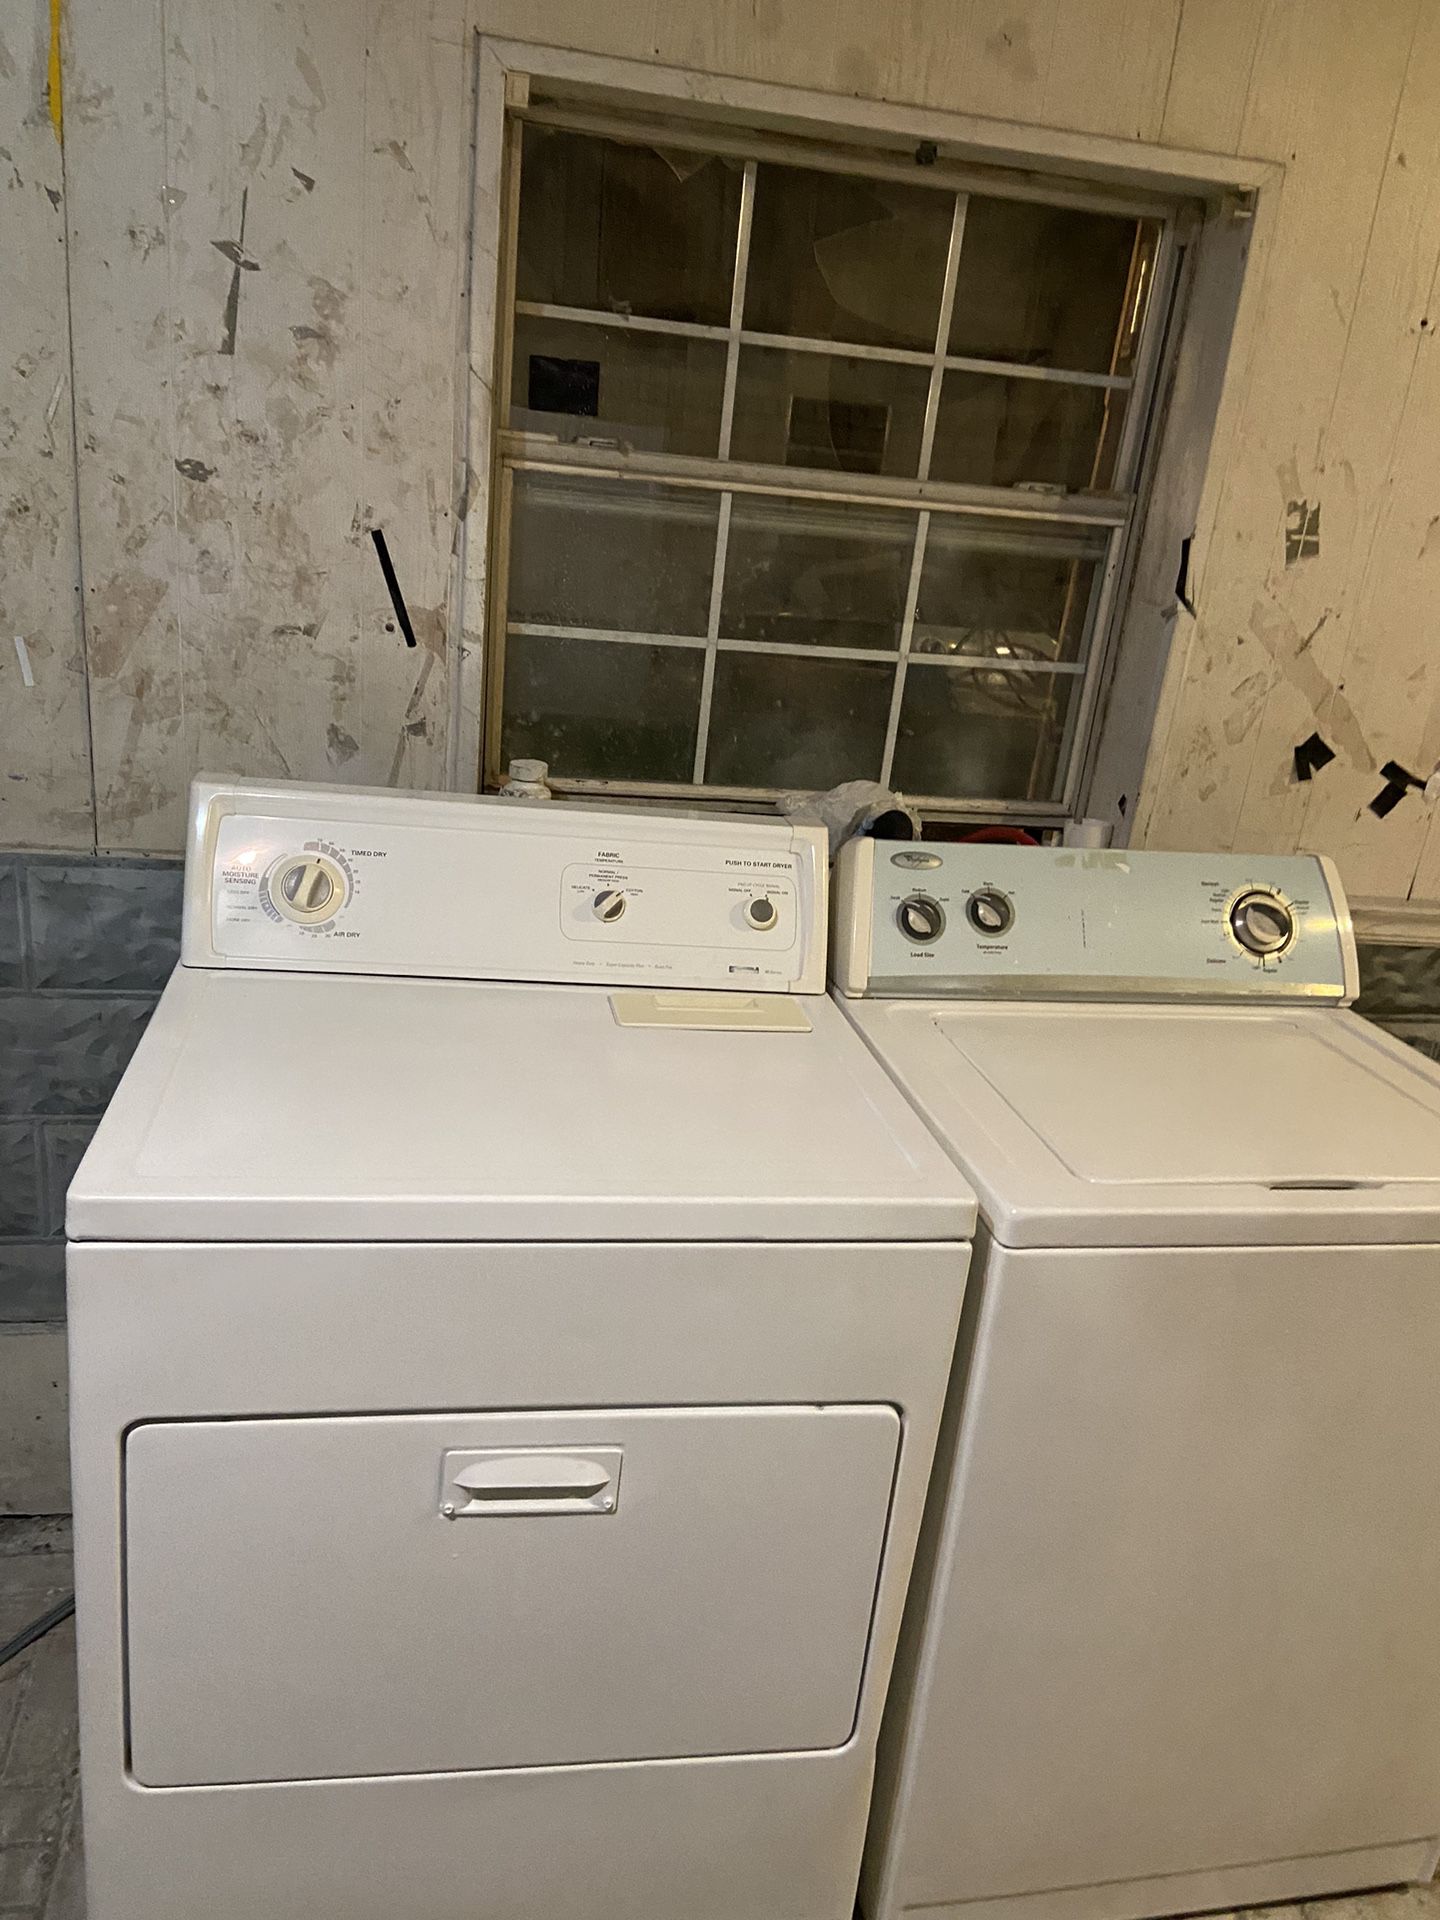 ILL RUN BOTH FOR YOU! EXCELLENT RUNNING WHIRLPOOL SUPER LOAD SIZE CAPACITY WASHER & WHIRLPOOL KENMORE ELECTRIC DRYER. BOTH RUN LIKE NEW & ARE QUIET. W